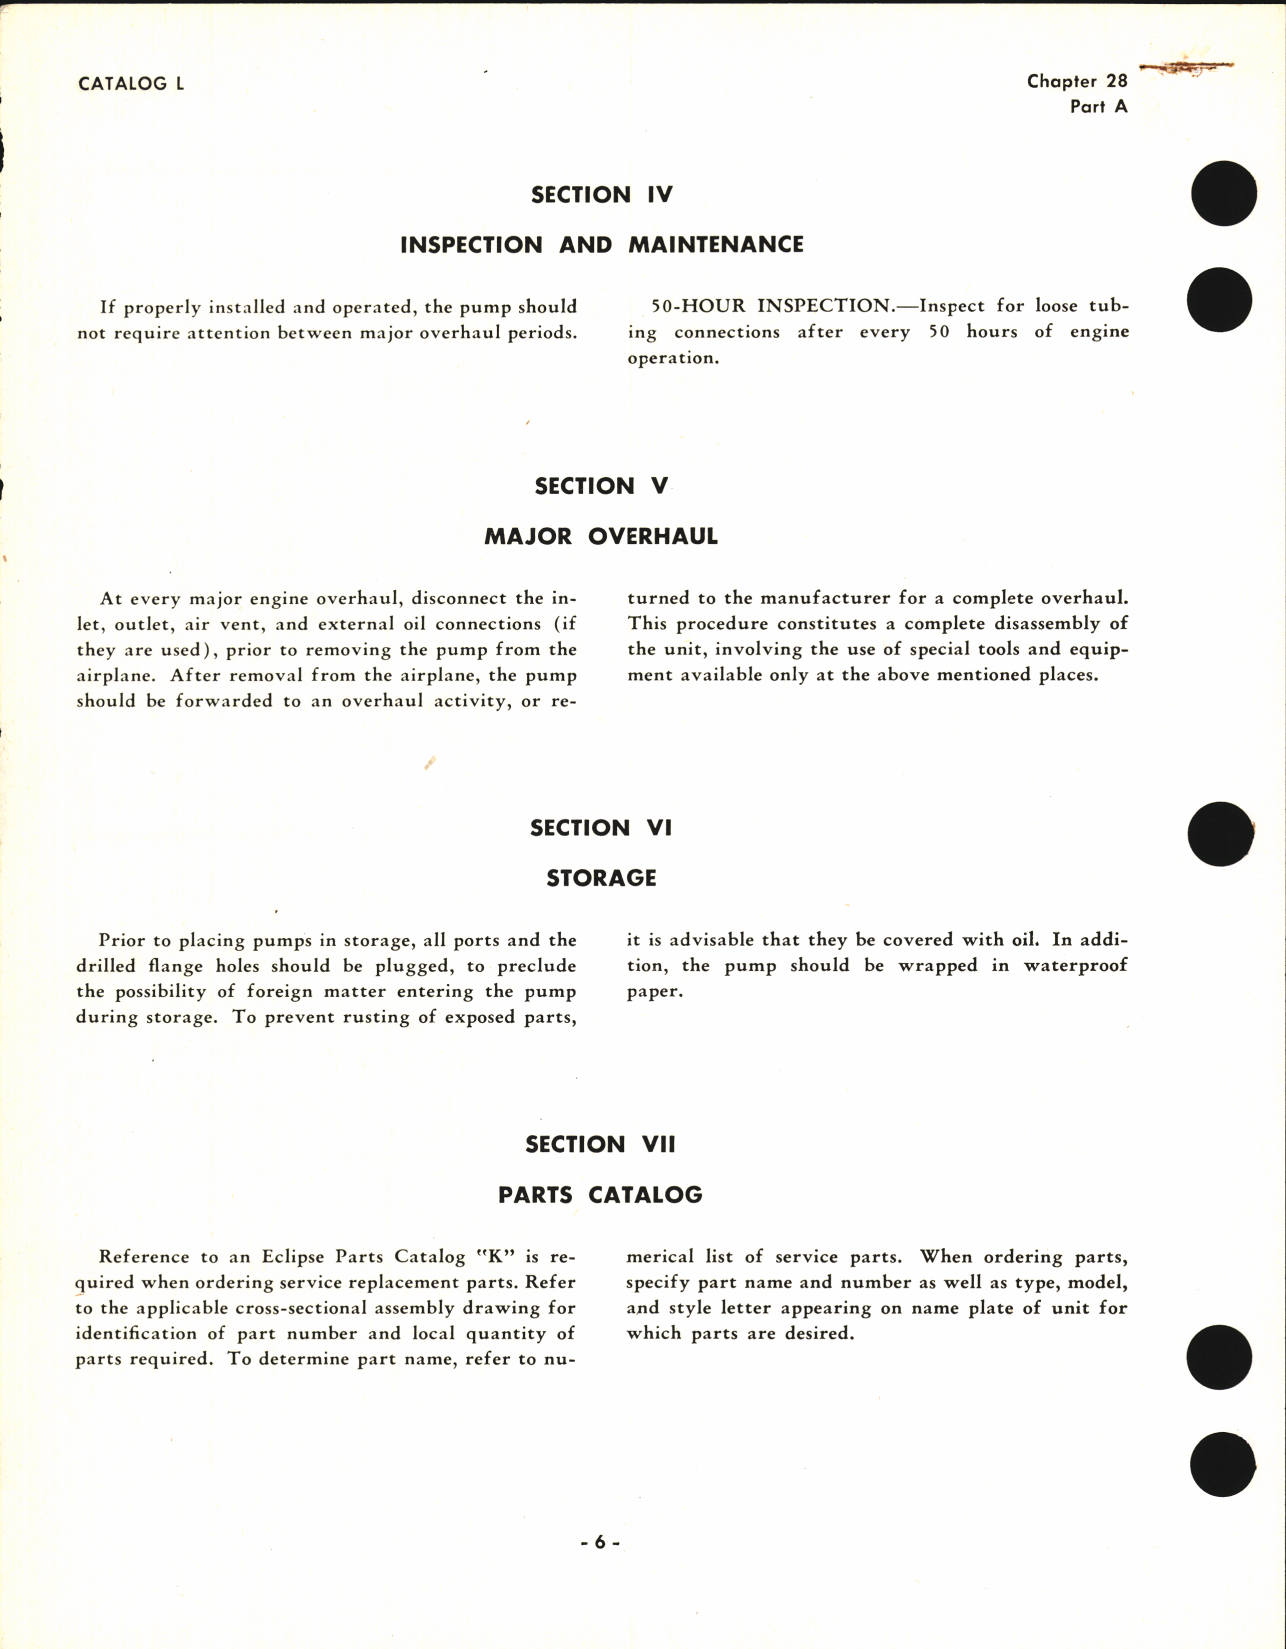 Sample page 6 from AirCorps Library document: Operating and Service Instructions for Eclipse Aviation Engine-Driven Air Pumps Type 548